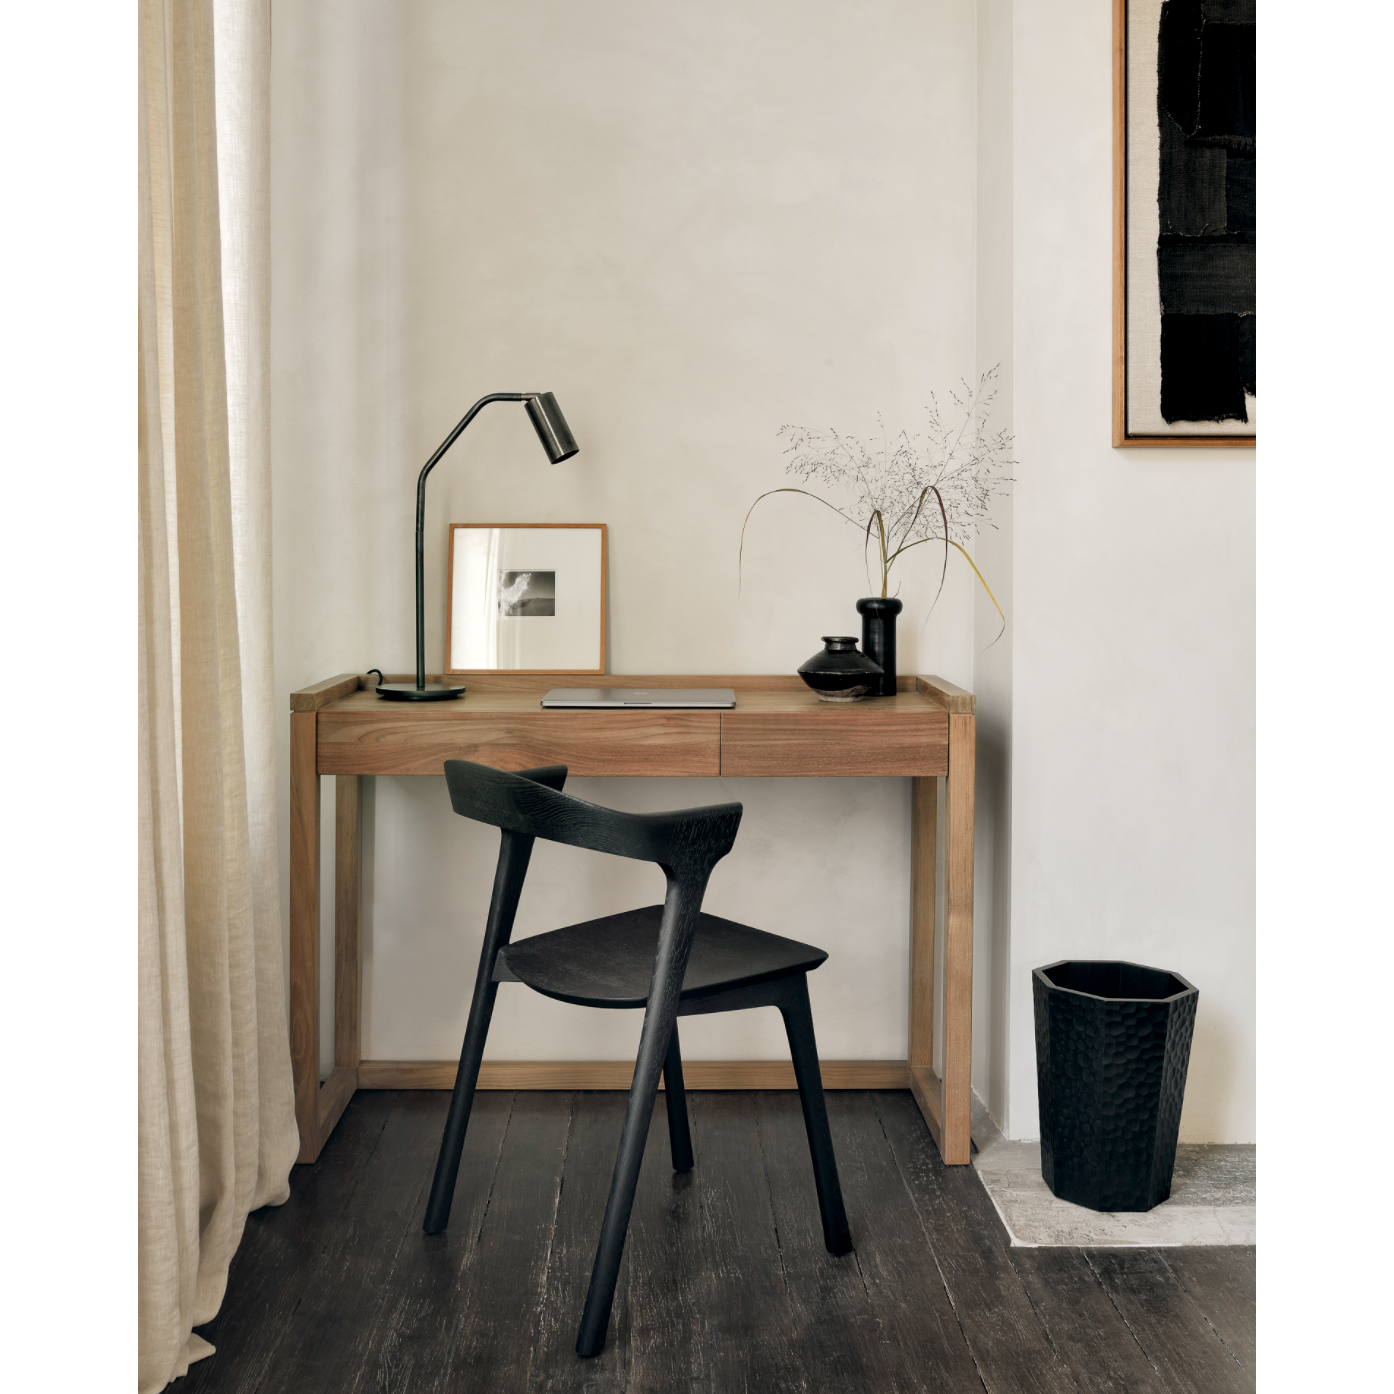 This Oak Bok Dining Chair features an airy shape with rock-solid construction, making this piece a timeless and remarkable design to enjoy for years to come. Pair with a dining table or stand-alone against a wall, hallway, or end of the bed! Designed by Alain can Havre Dimensions: 20"w x 21.5"d x 30"h Weight: 15 lbs Seat Height: 18" Seat Height with Upholstery: 19" Material: Oak, 100% solid wood Finish: Varnished